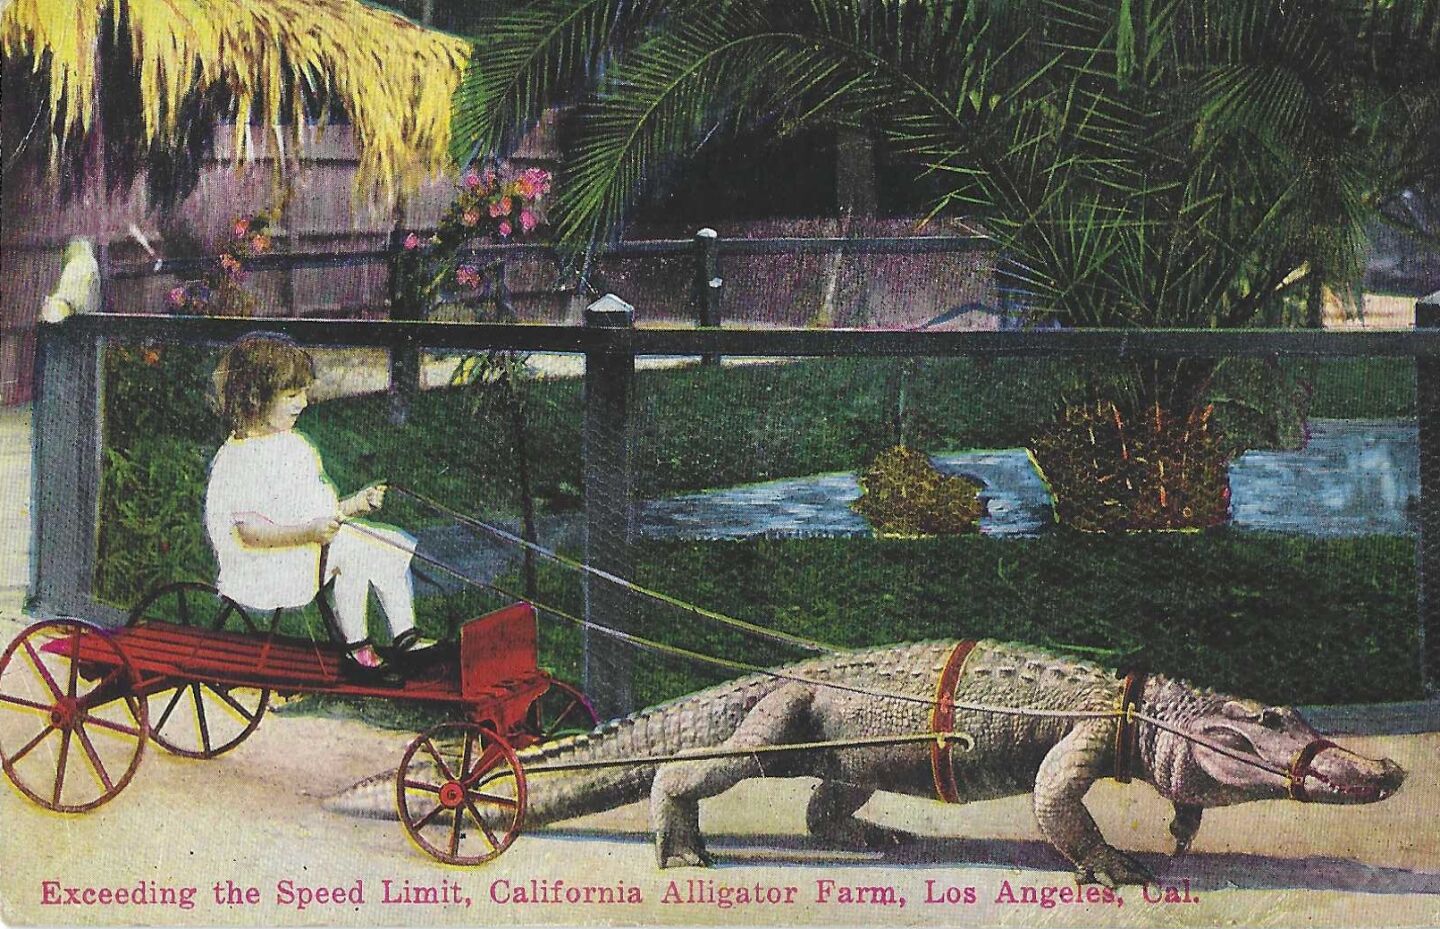 "Exceeding the Speed Limit," the caption reads on a vintage postcard. Speed would seem to be the least concerning aspect of this scene.